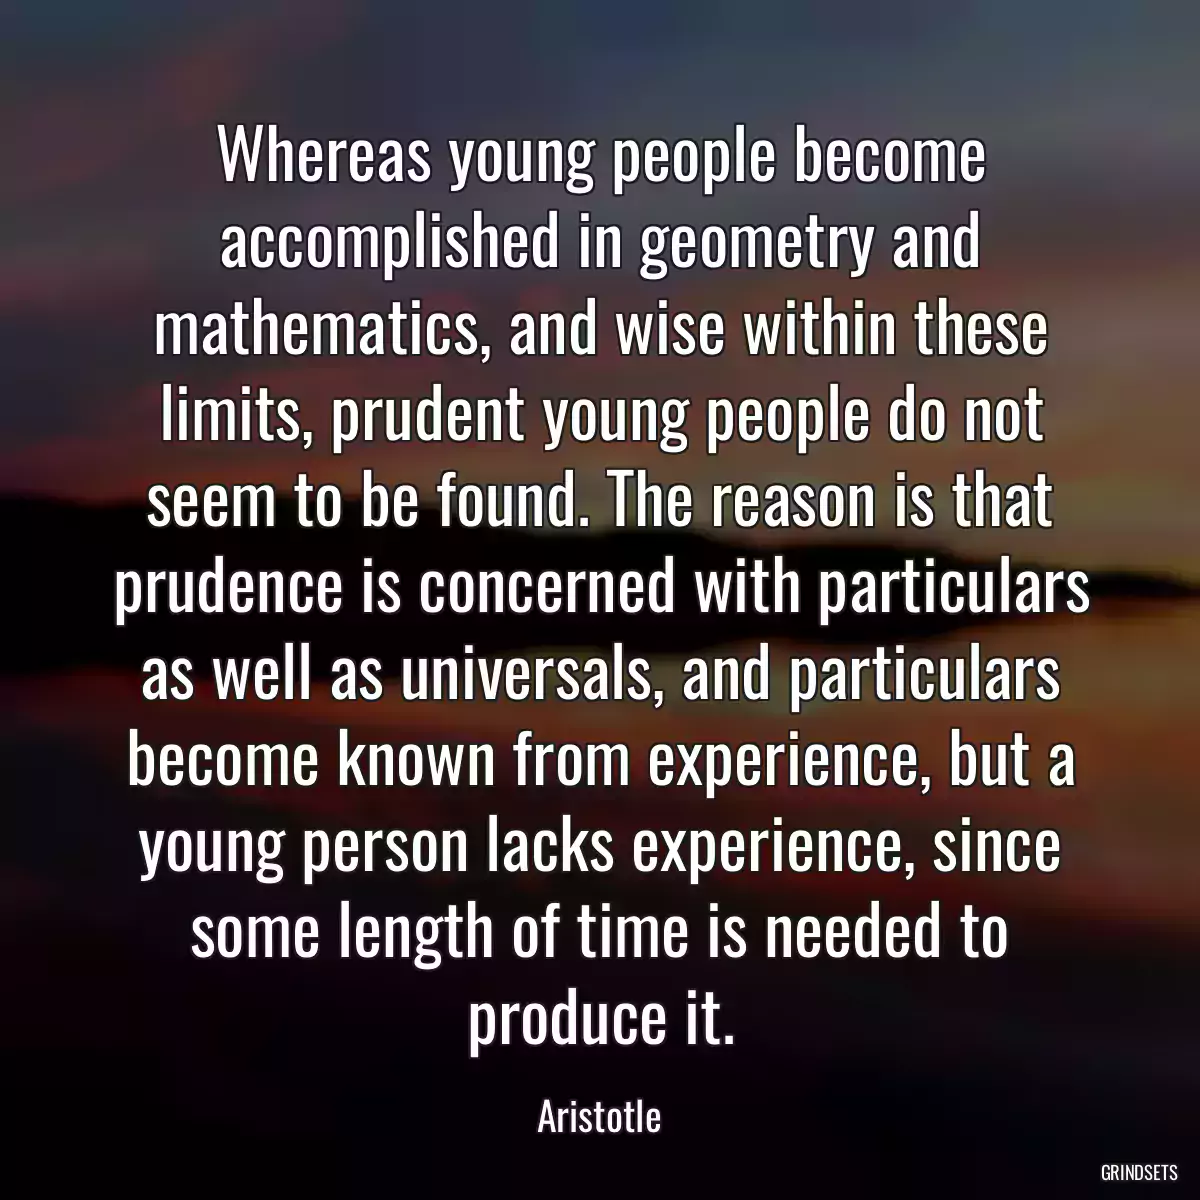 Whereas young people become accomplished in geometry and mathematics, and wise within these limits, prudent young people do not seem to be found. The reason is that prudence is concerned with particulars as well as universals, and particulars become known from experience, but a young person lacks experience, since some length of time is needed to produce it.